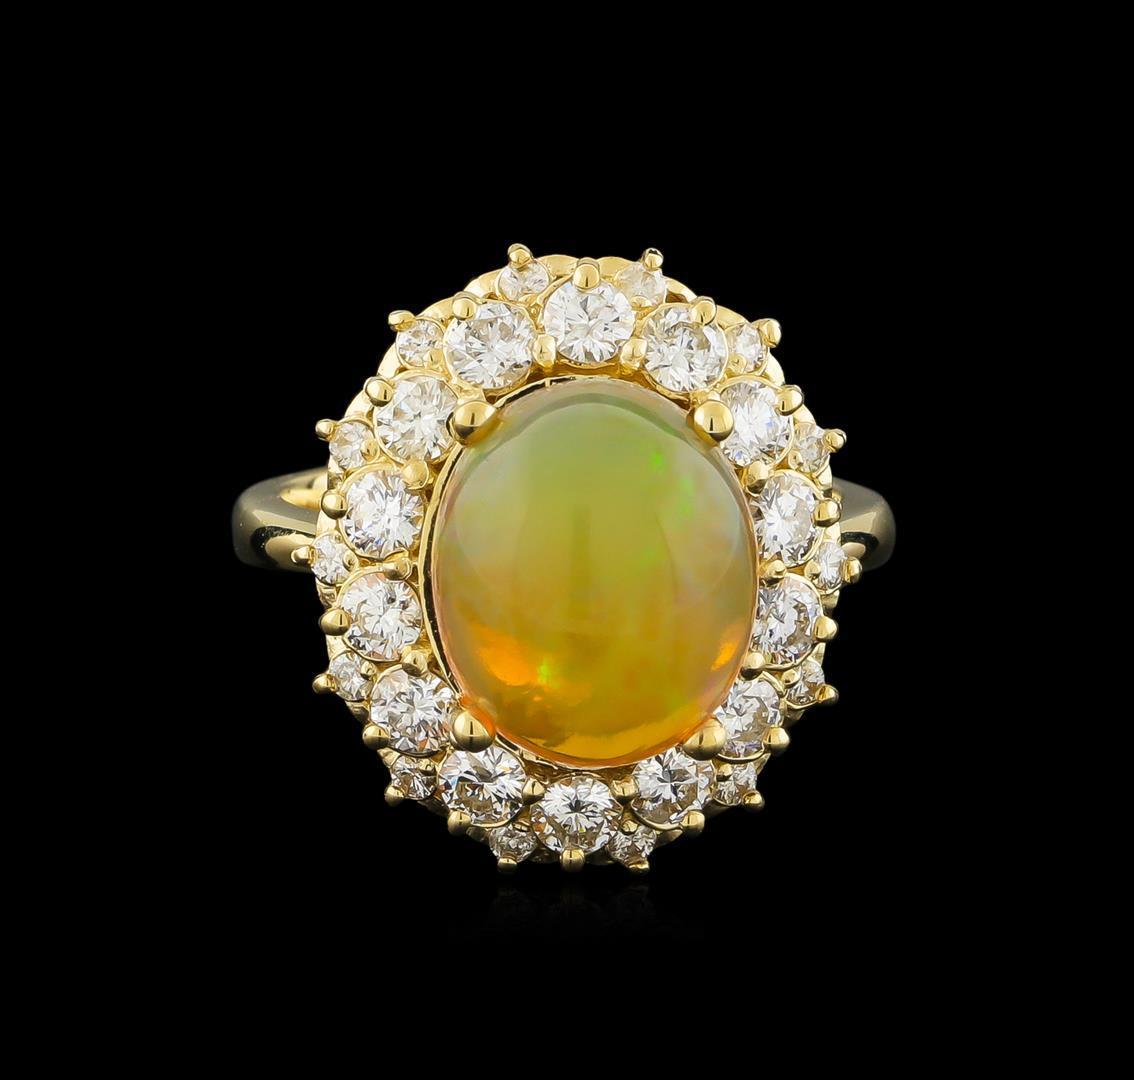 3.70 ctw Opal and Diamond Ring - 14KT Yellow Gold